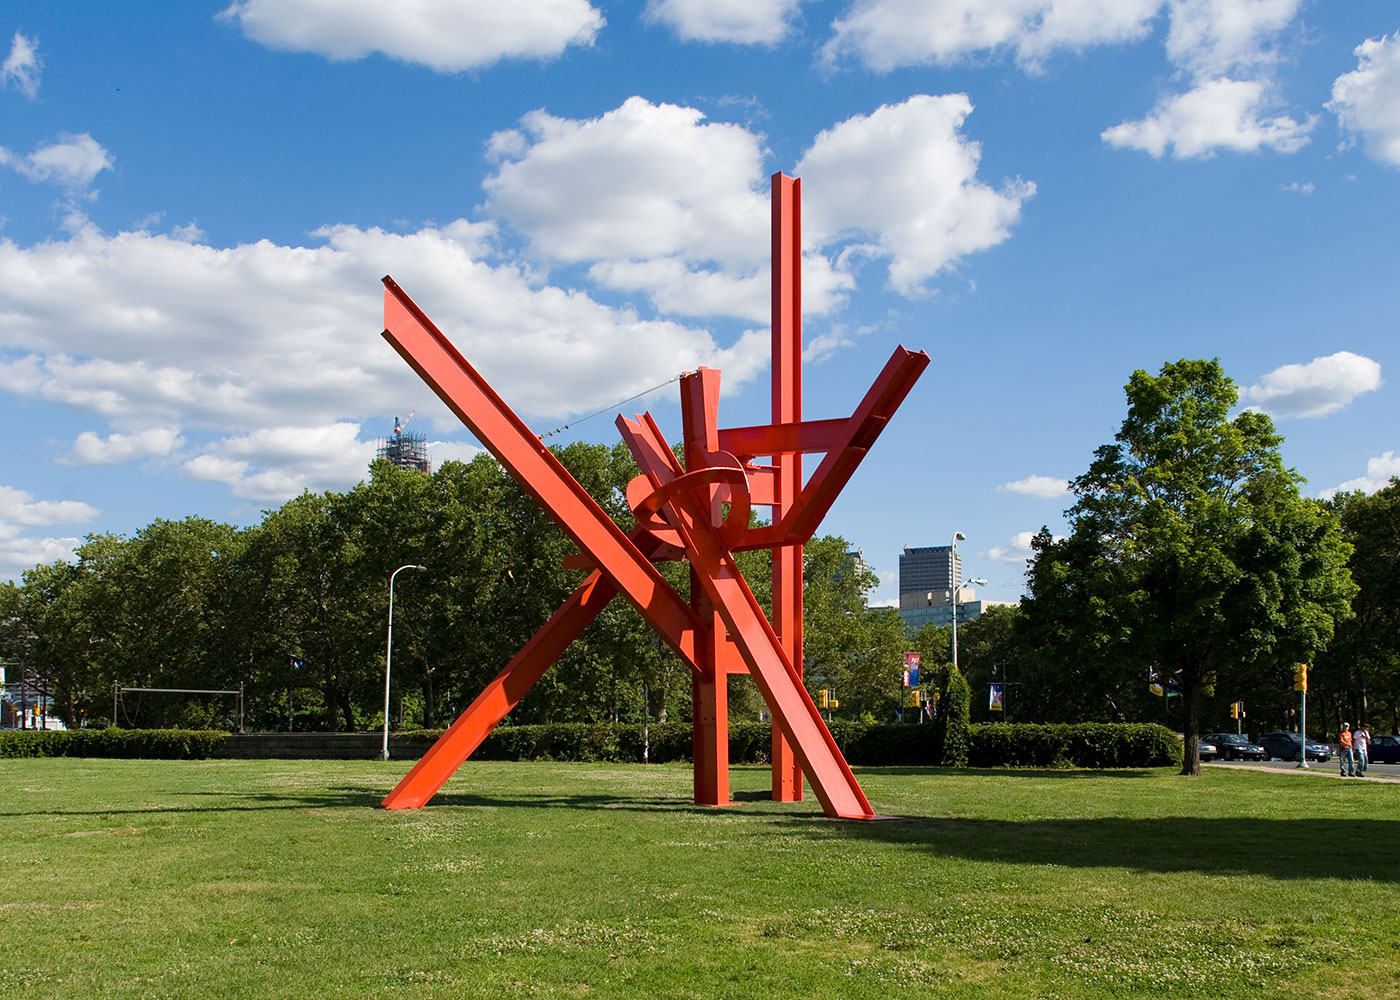 Iroquois red i-beam sculpture by Mark di Suvero